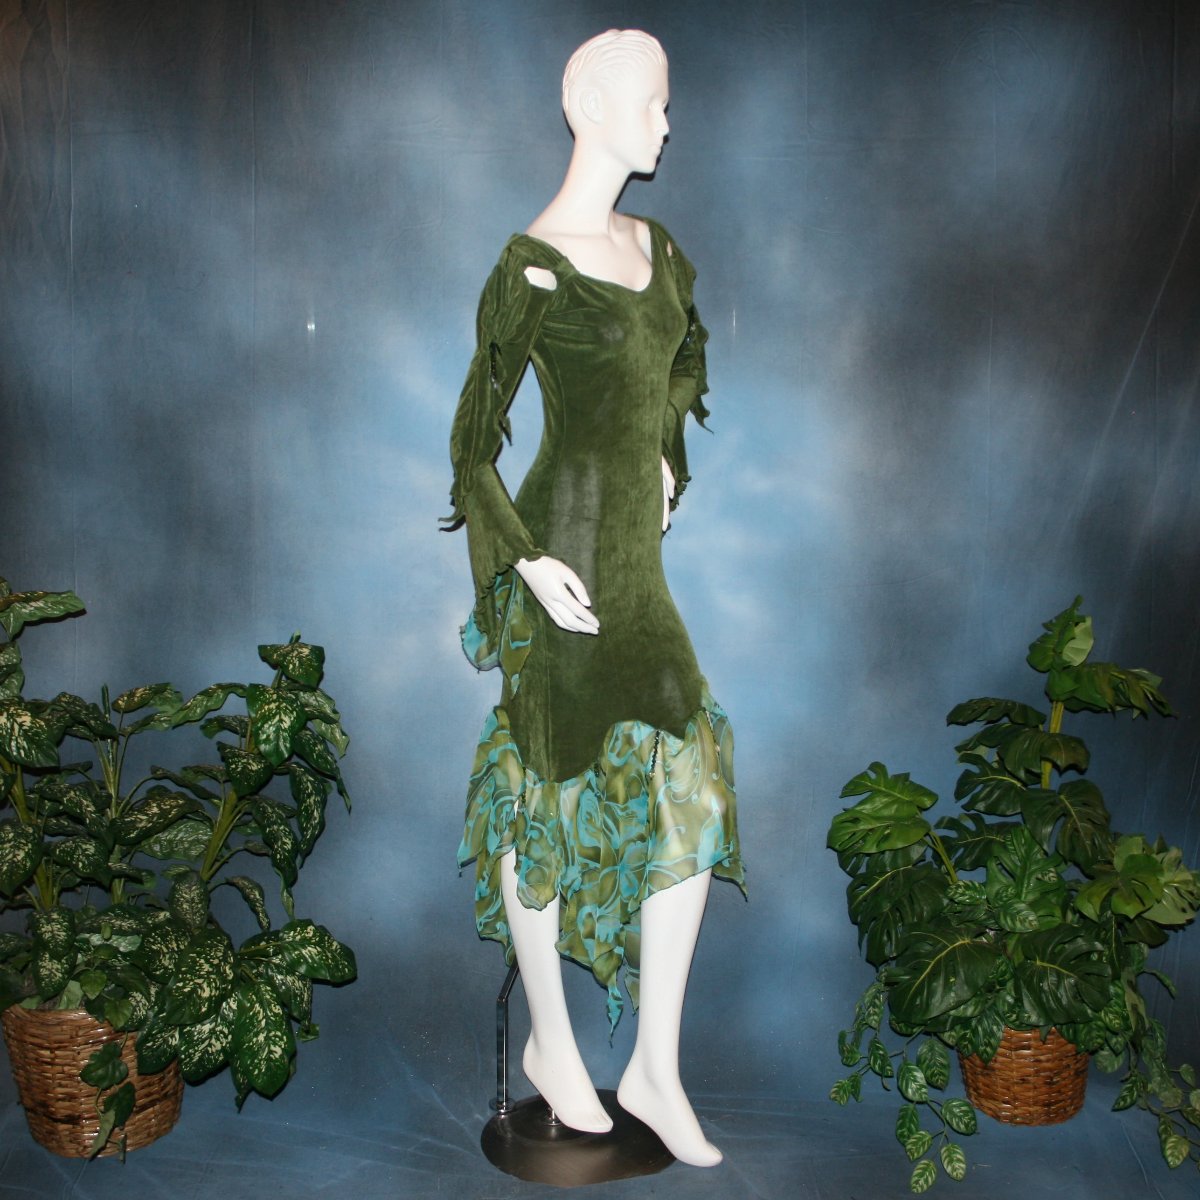 Side view of Green ballroom social/Latin/rhythm dress created in luxurious olive green solid slinky fabric with chiffon flounces of an olive green & teal print, is embellished with Swarovski hand beading. The arms have a beautiful, romantic & unique detailing! A great social dress for any ballroom dance or special occasion, as well as a great beginner ballroom dance show dress!